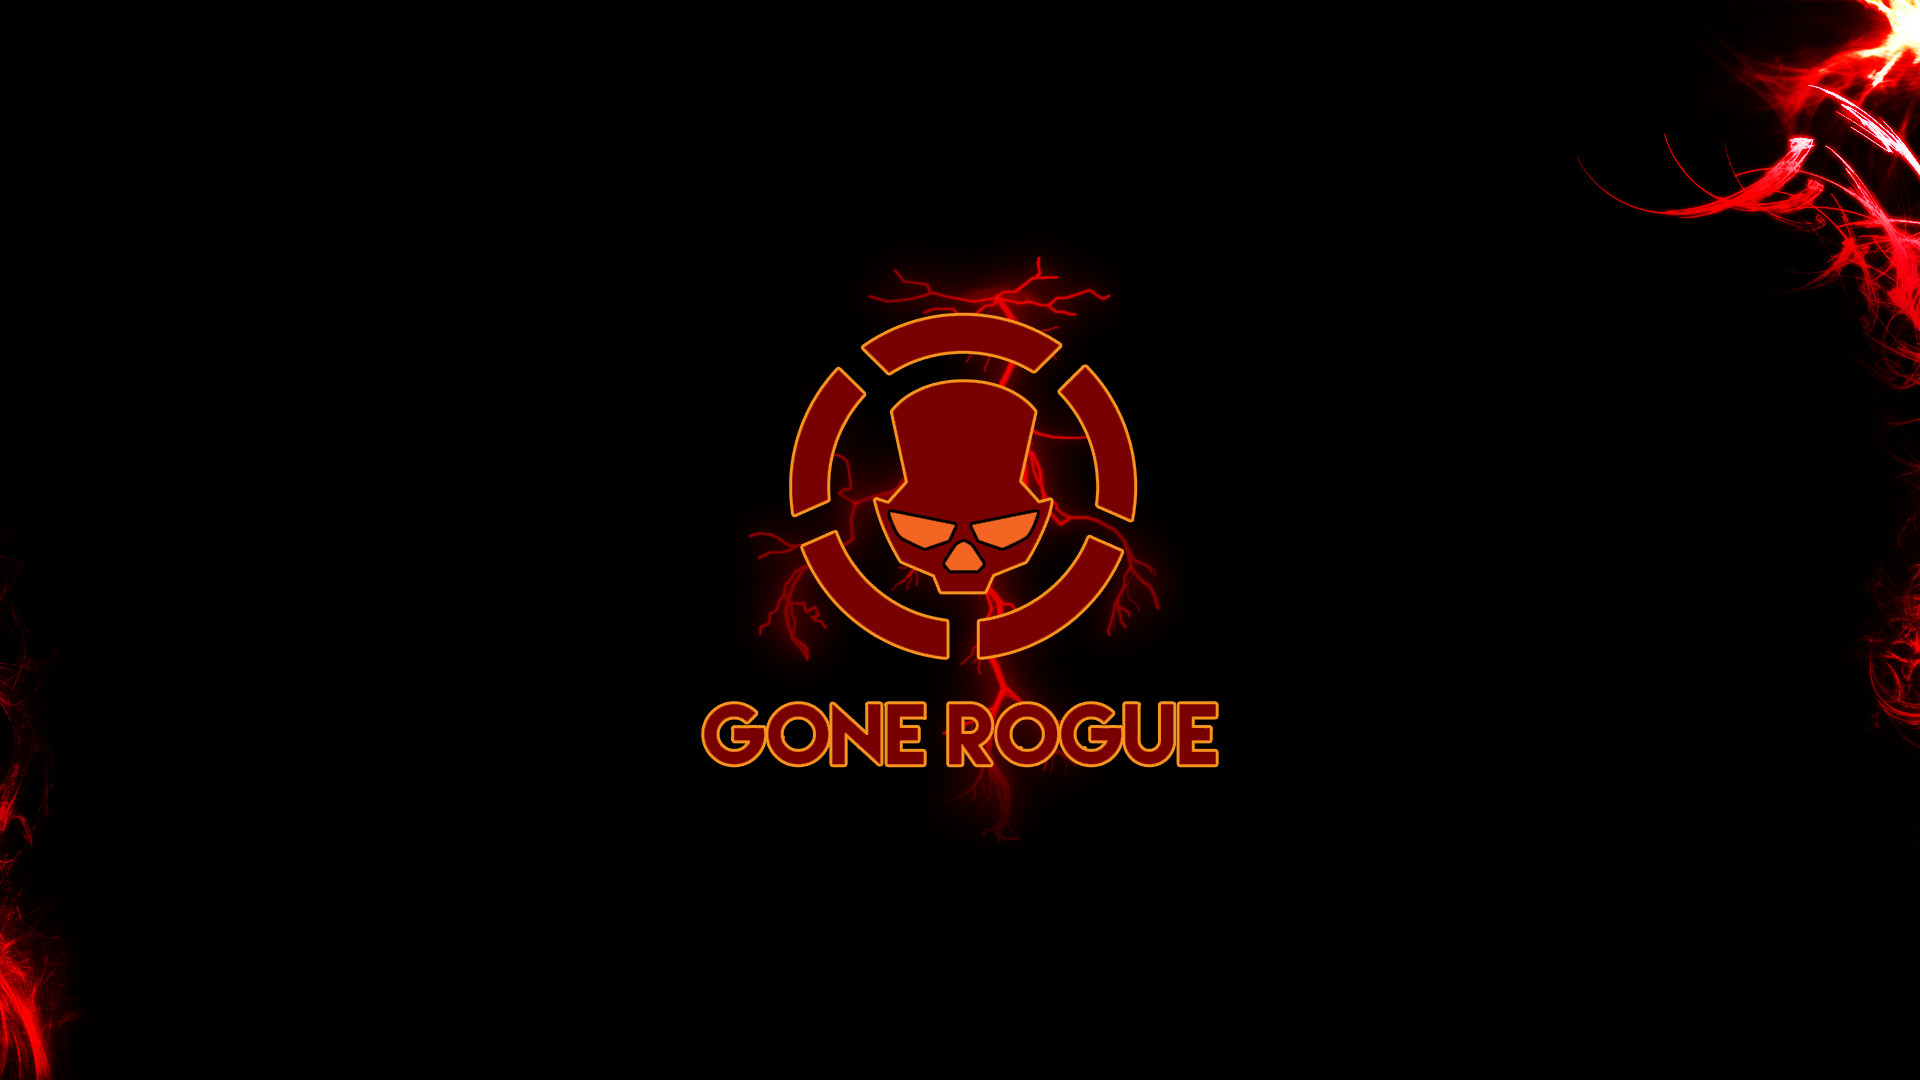 1920x1080 ... GONE ROGUE - Tom Clancy's The Division Wallpaper by Evanjoe251